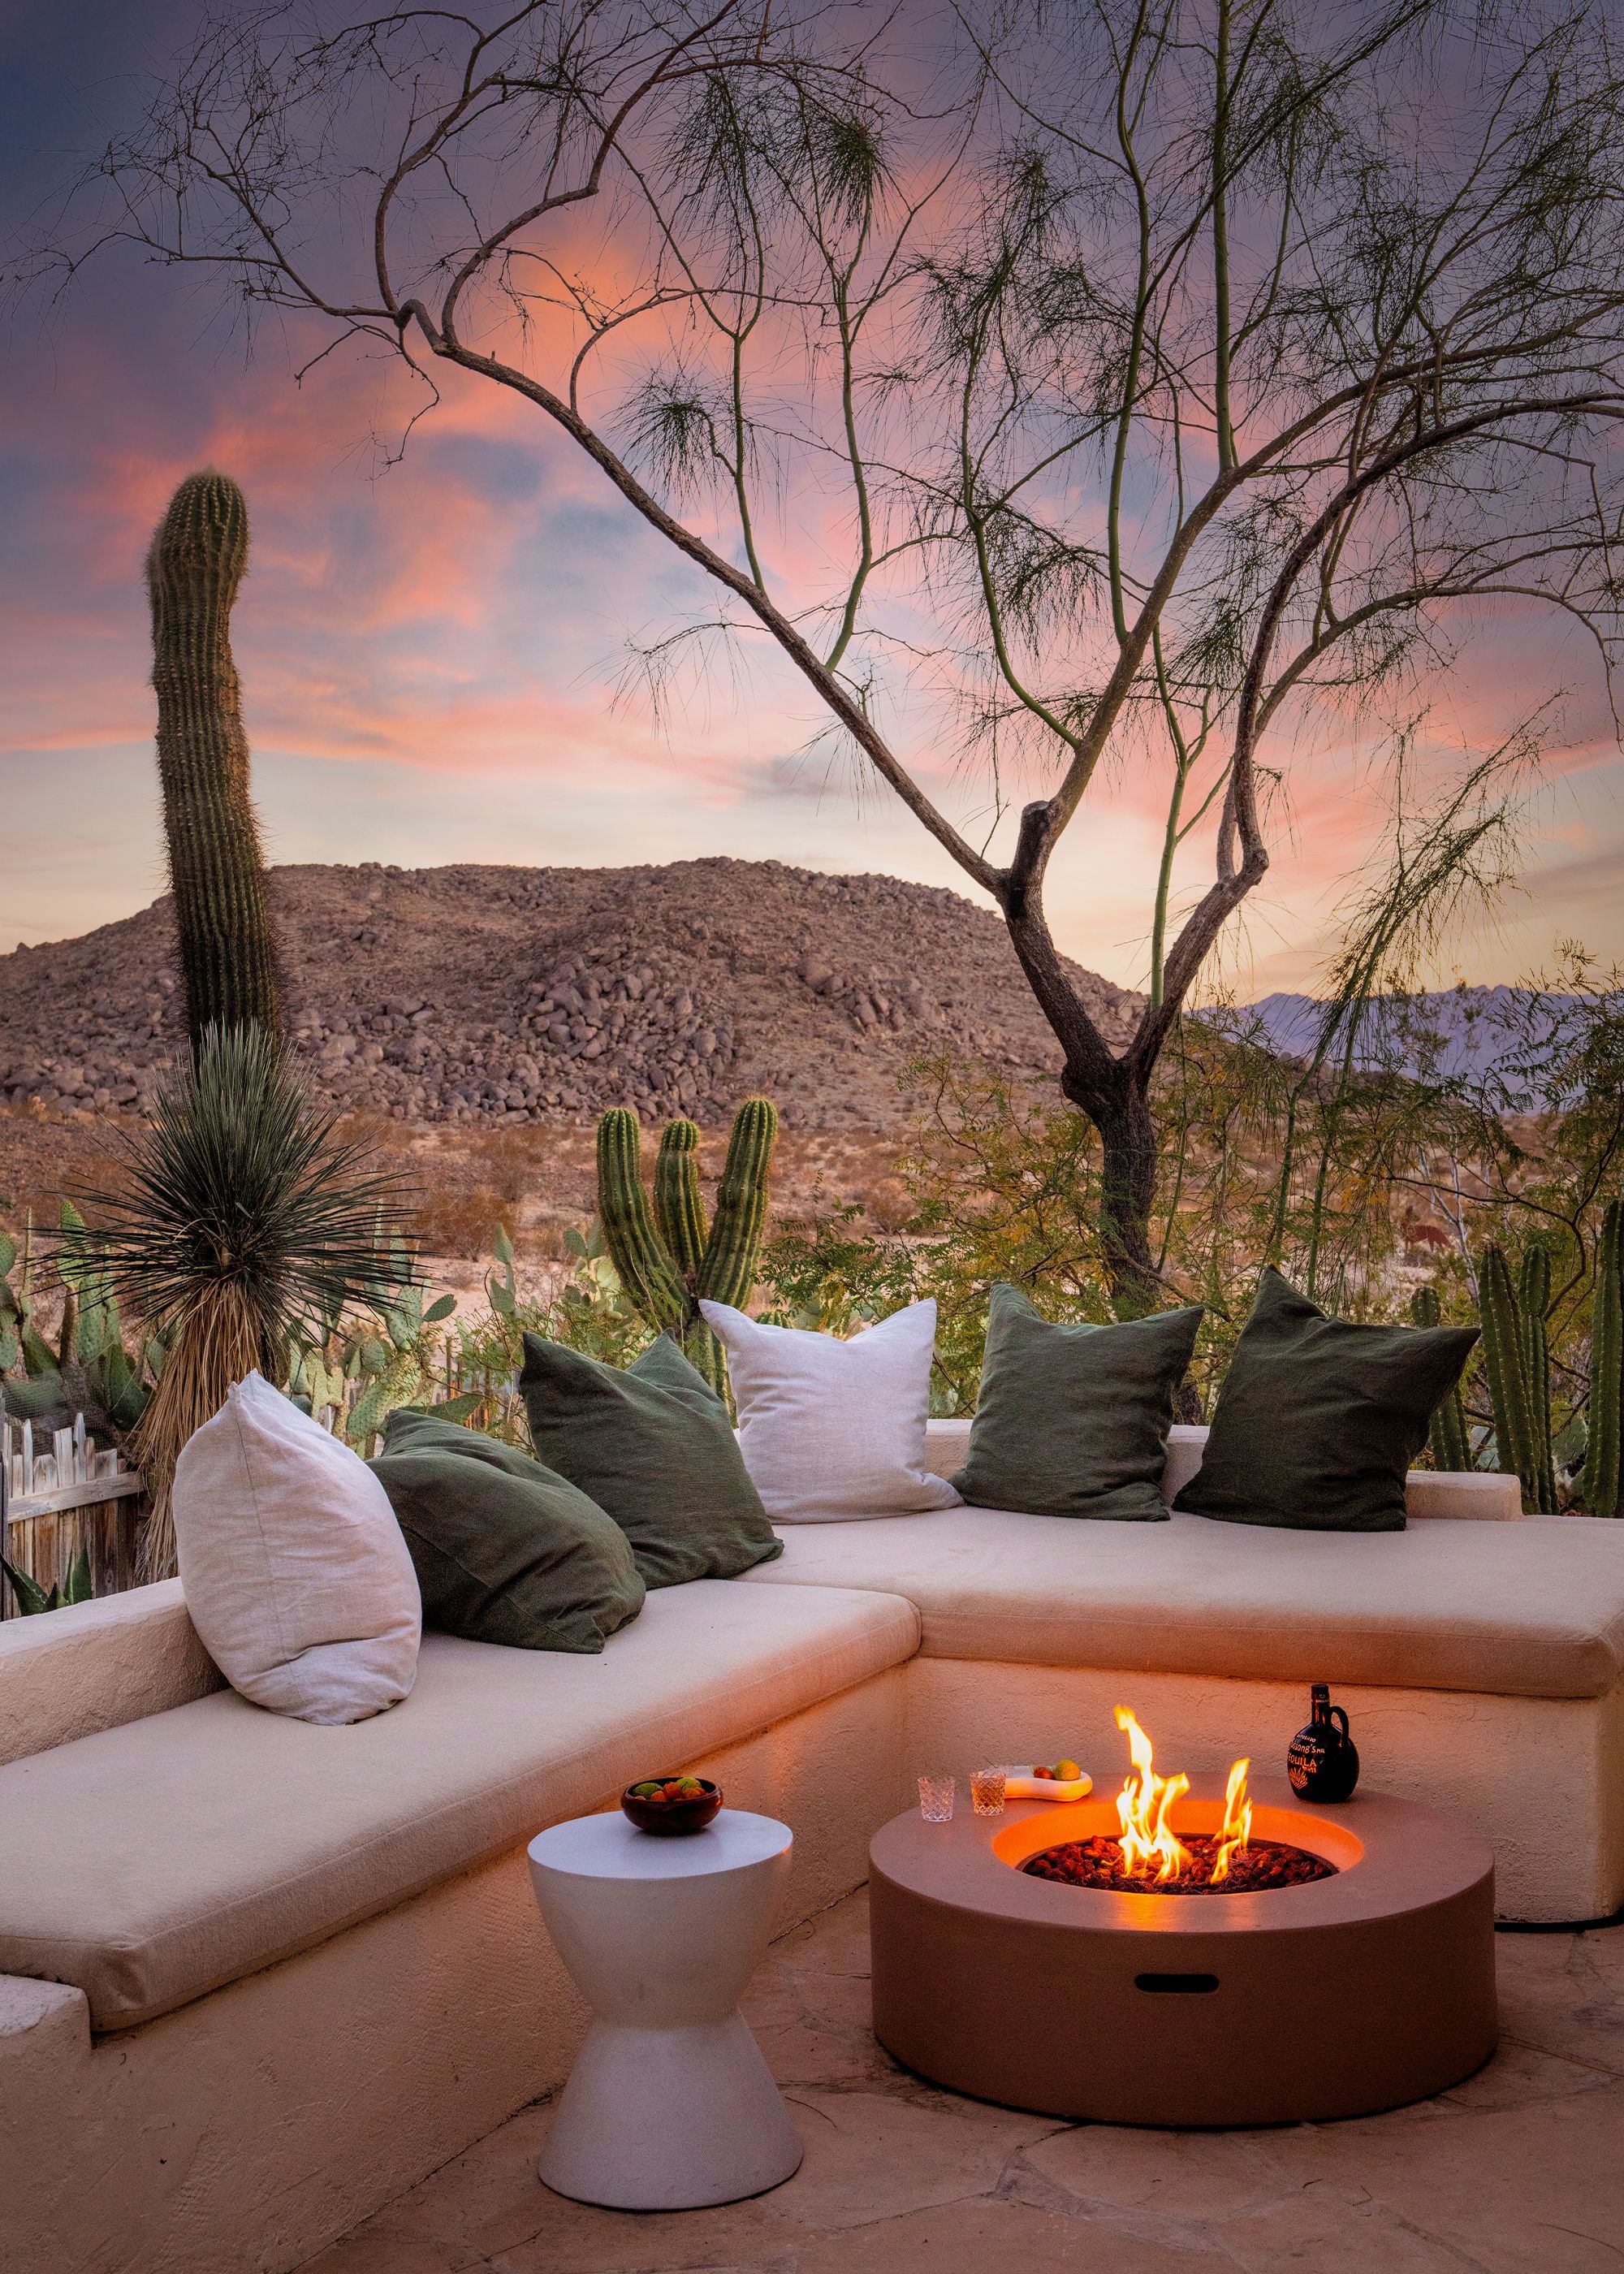 An outside sitting area around a fire pit in joshua tree